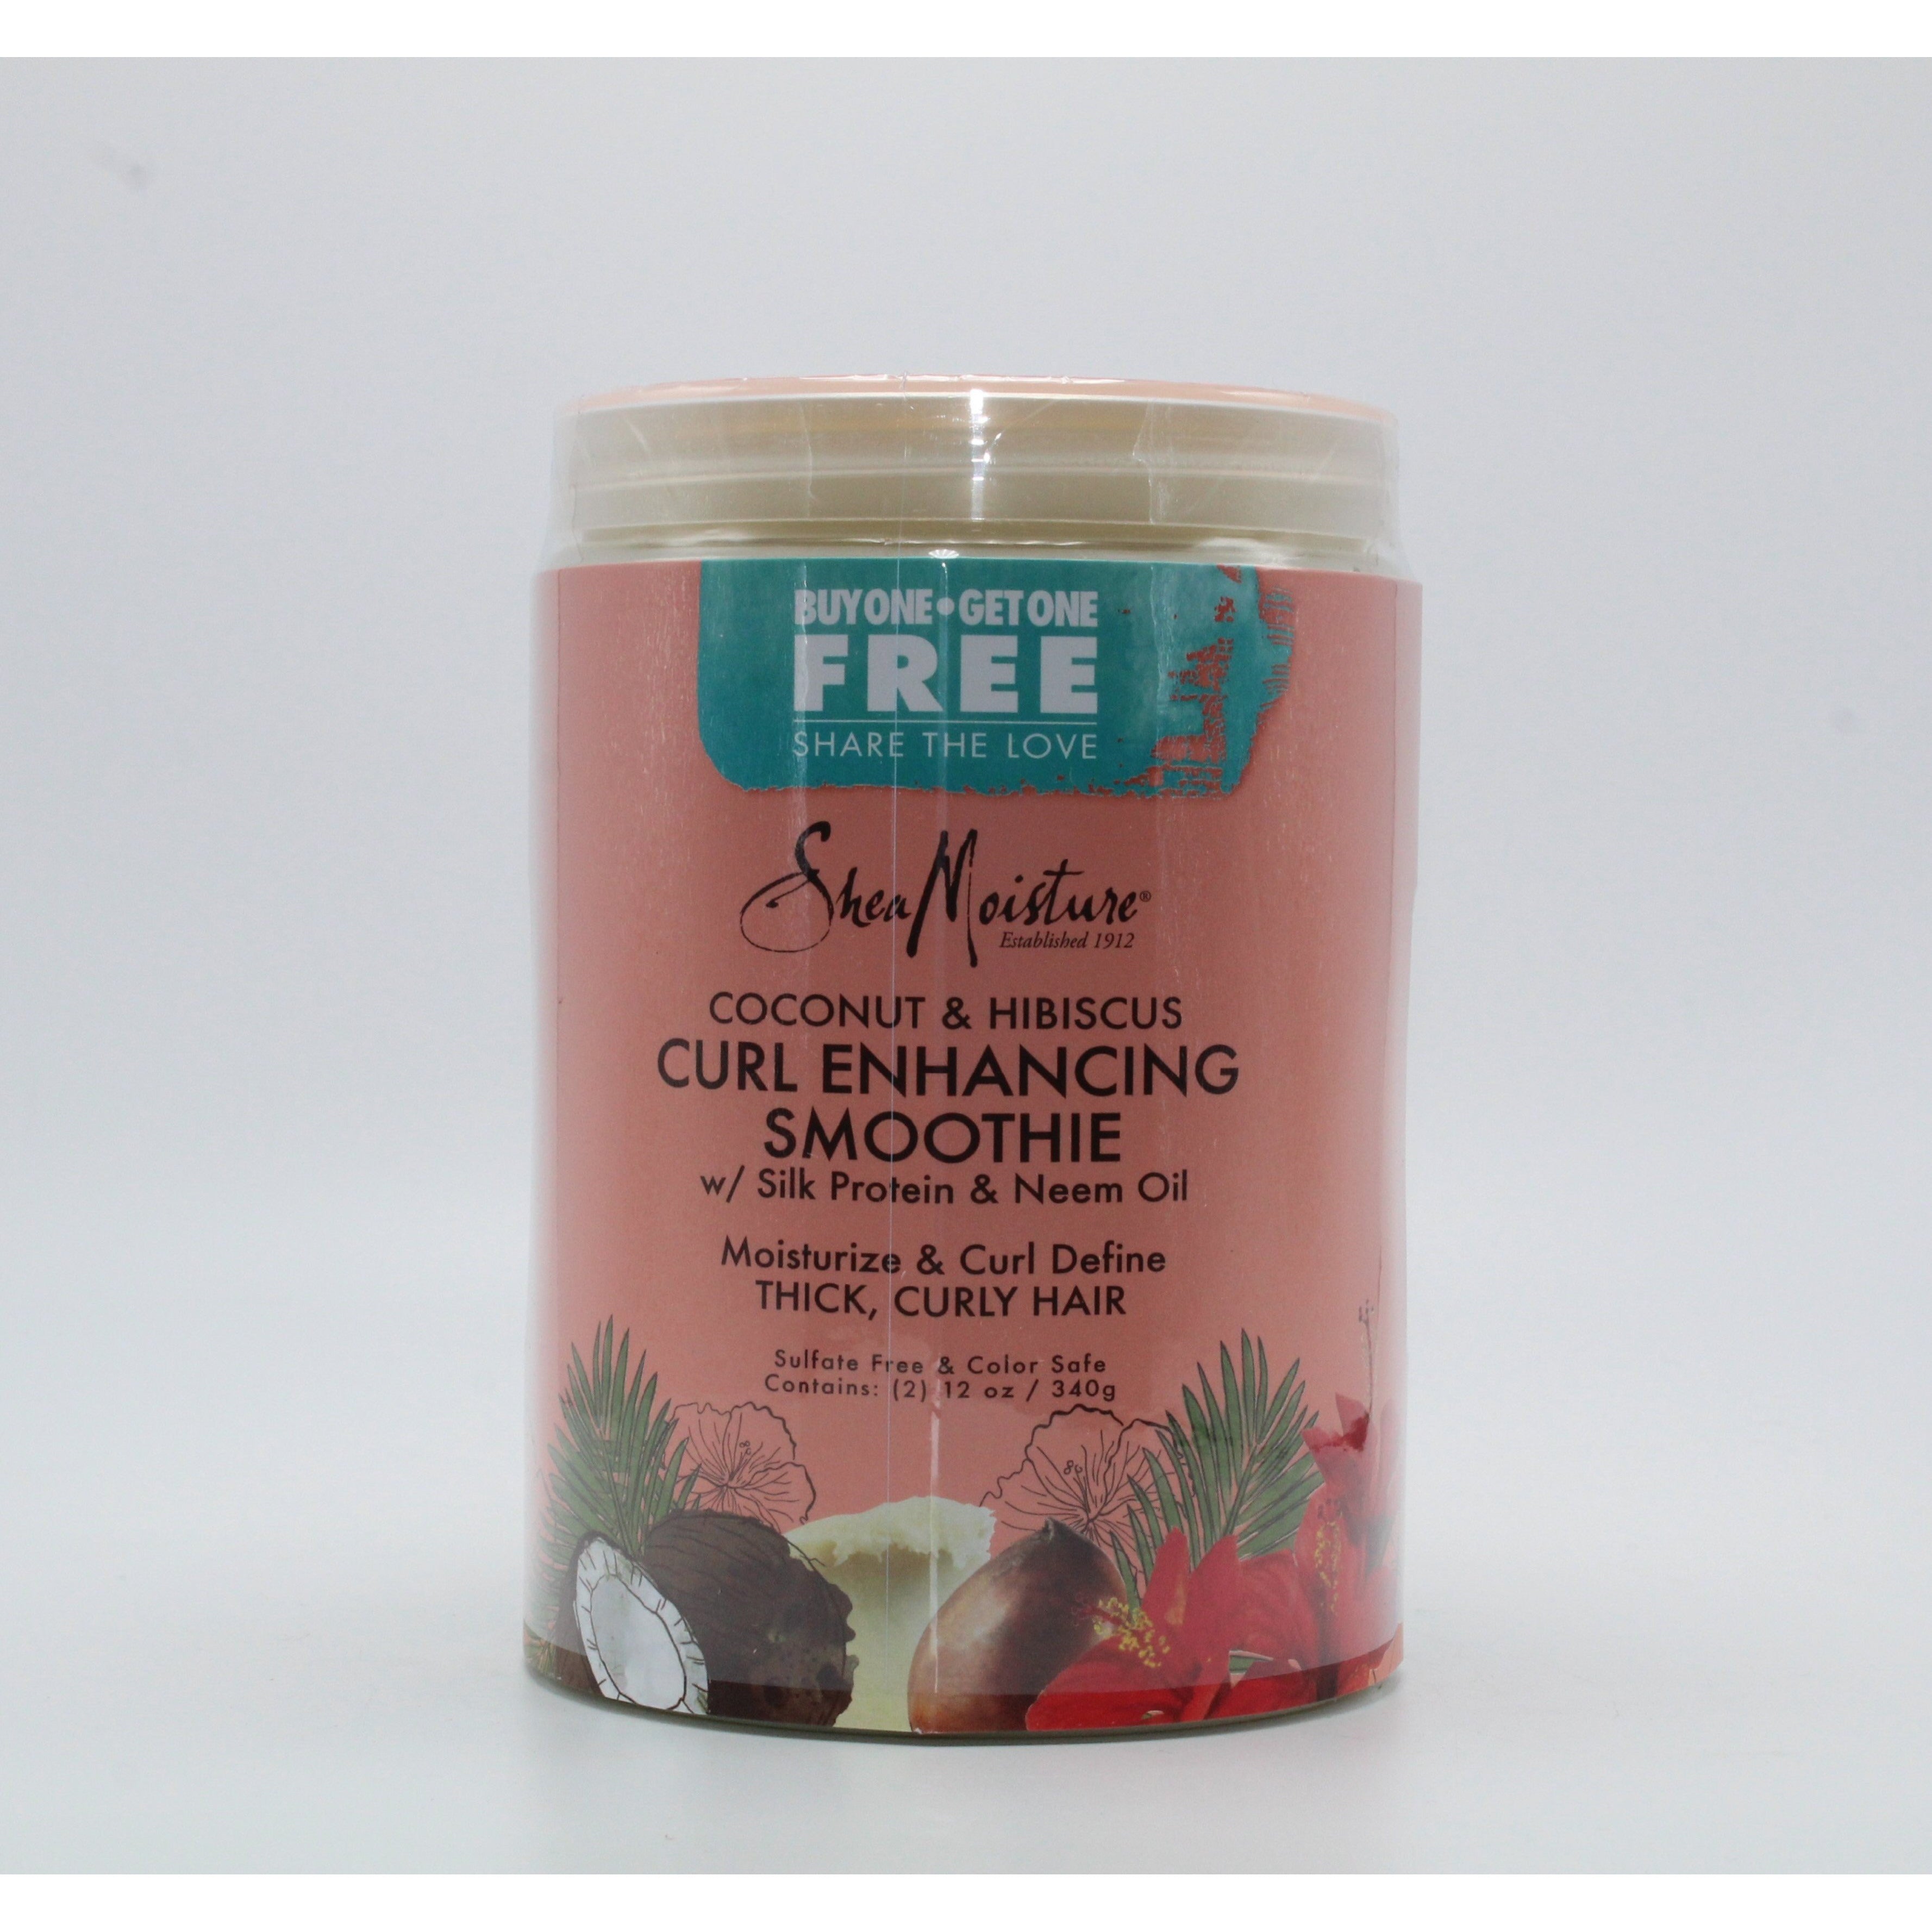 4th Ave Market: Shea Moisture Coconut Hibiscus Curl Enhancing Smoothie